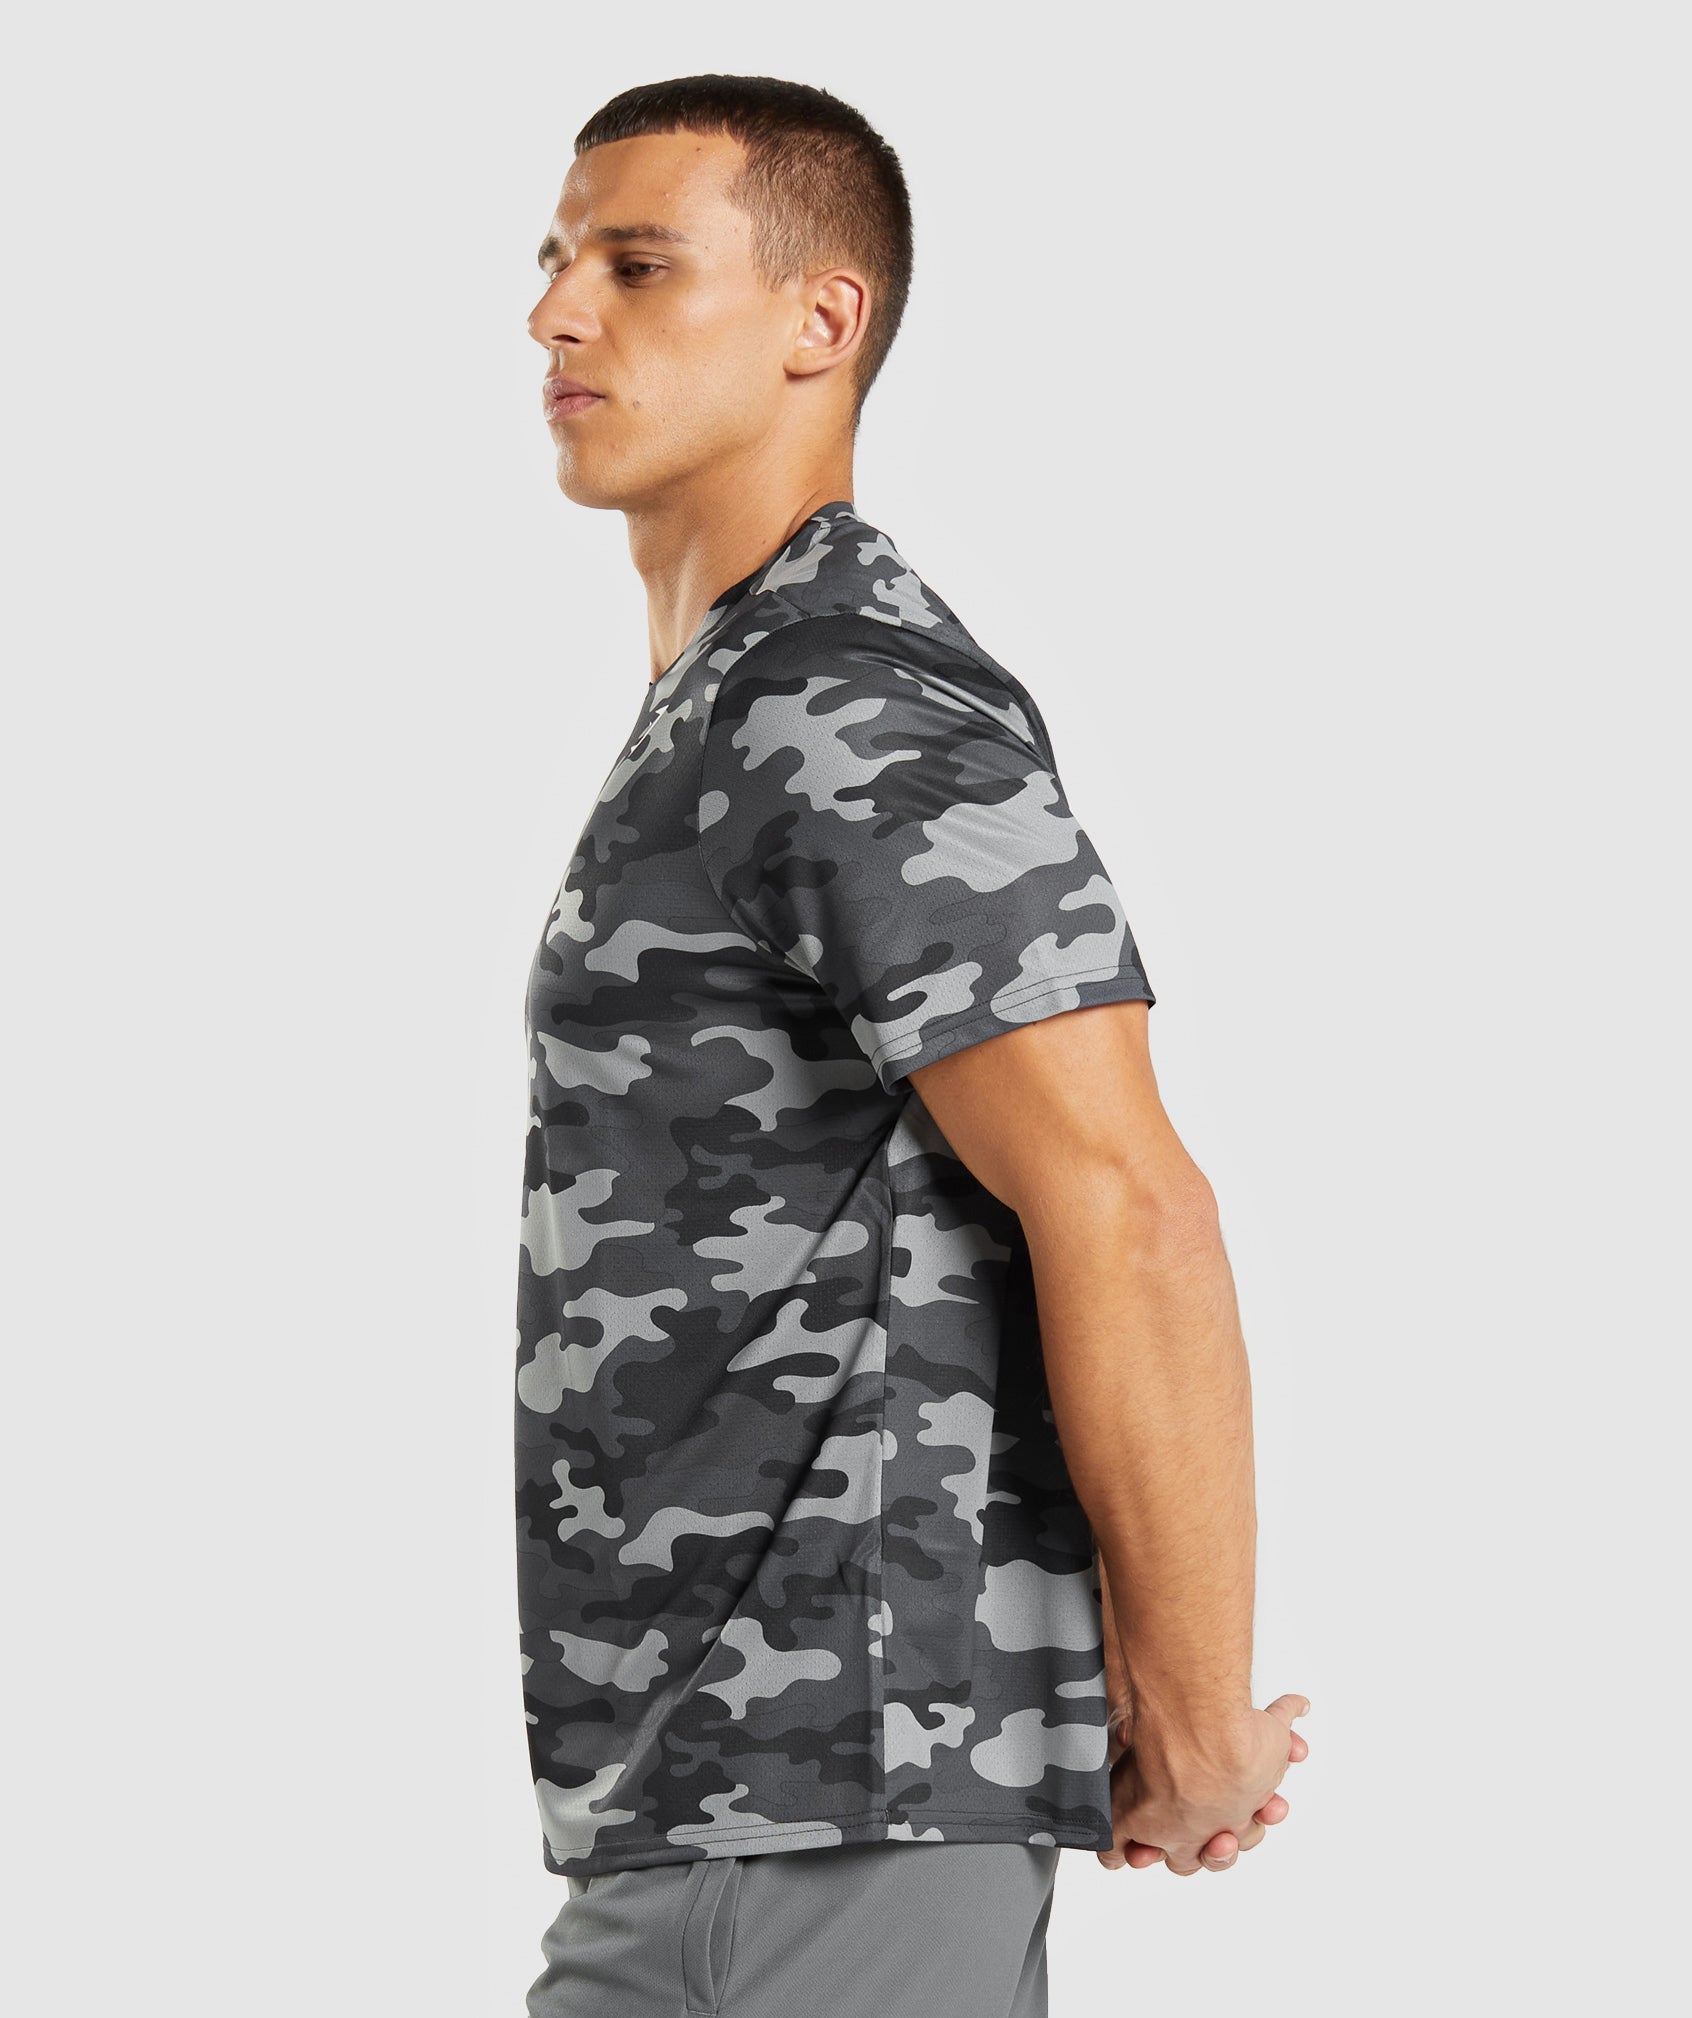 Arrival T-Shirt in Grey Print - view 3